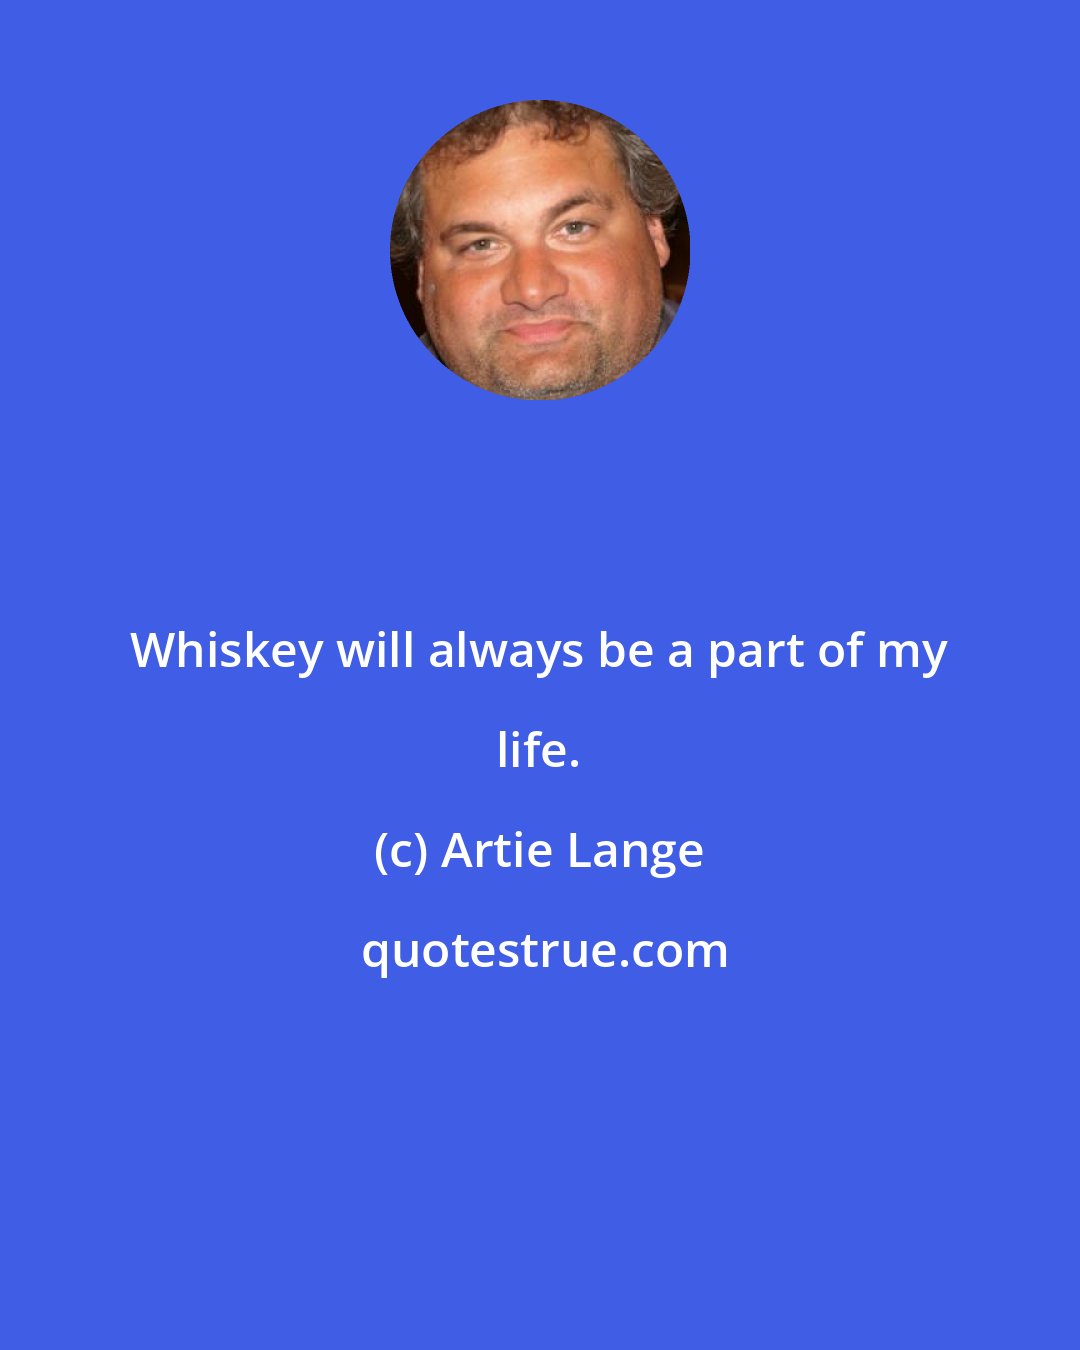 Artie Lange: Whiskey will always be a part of my life.